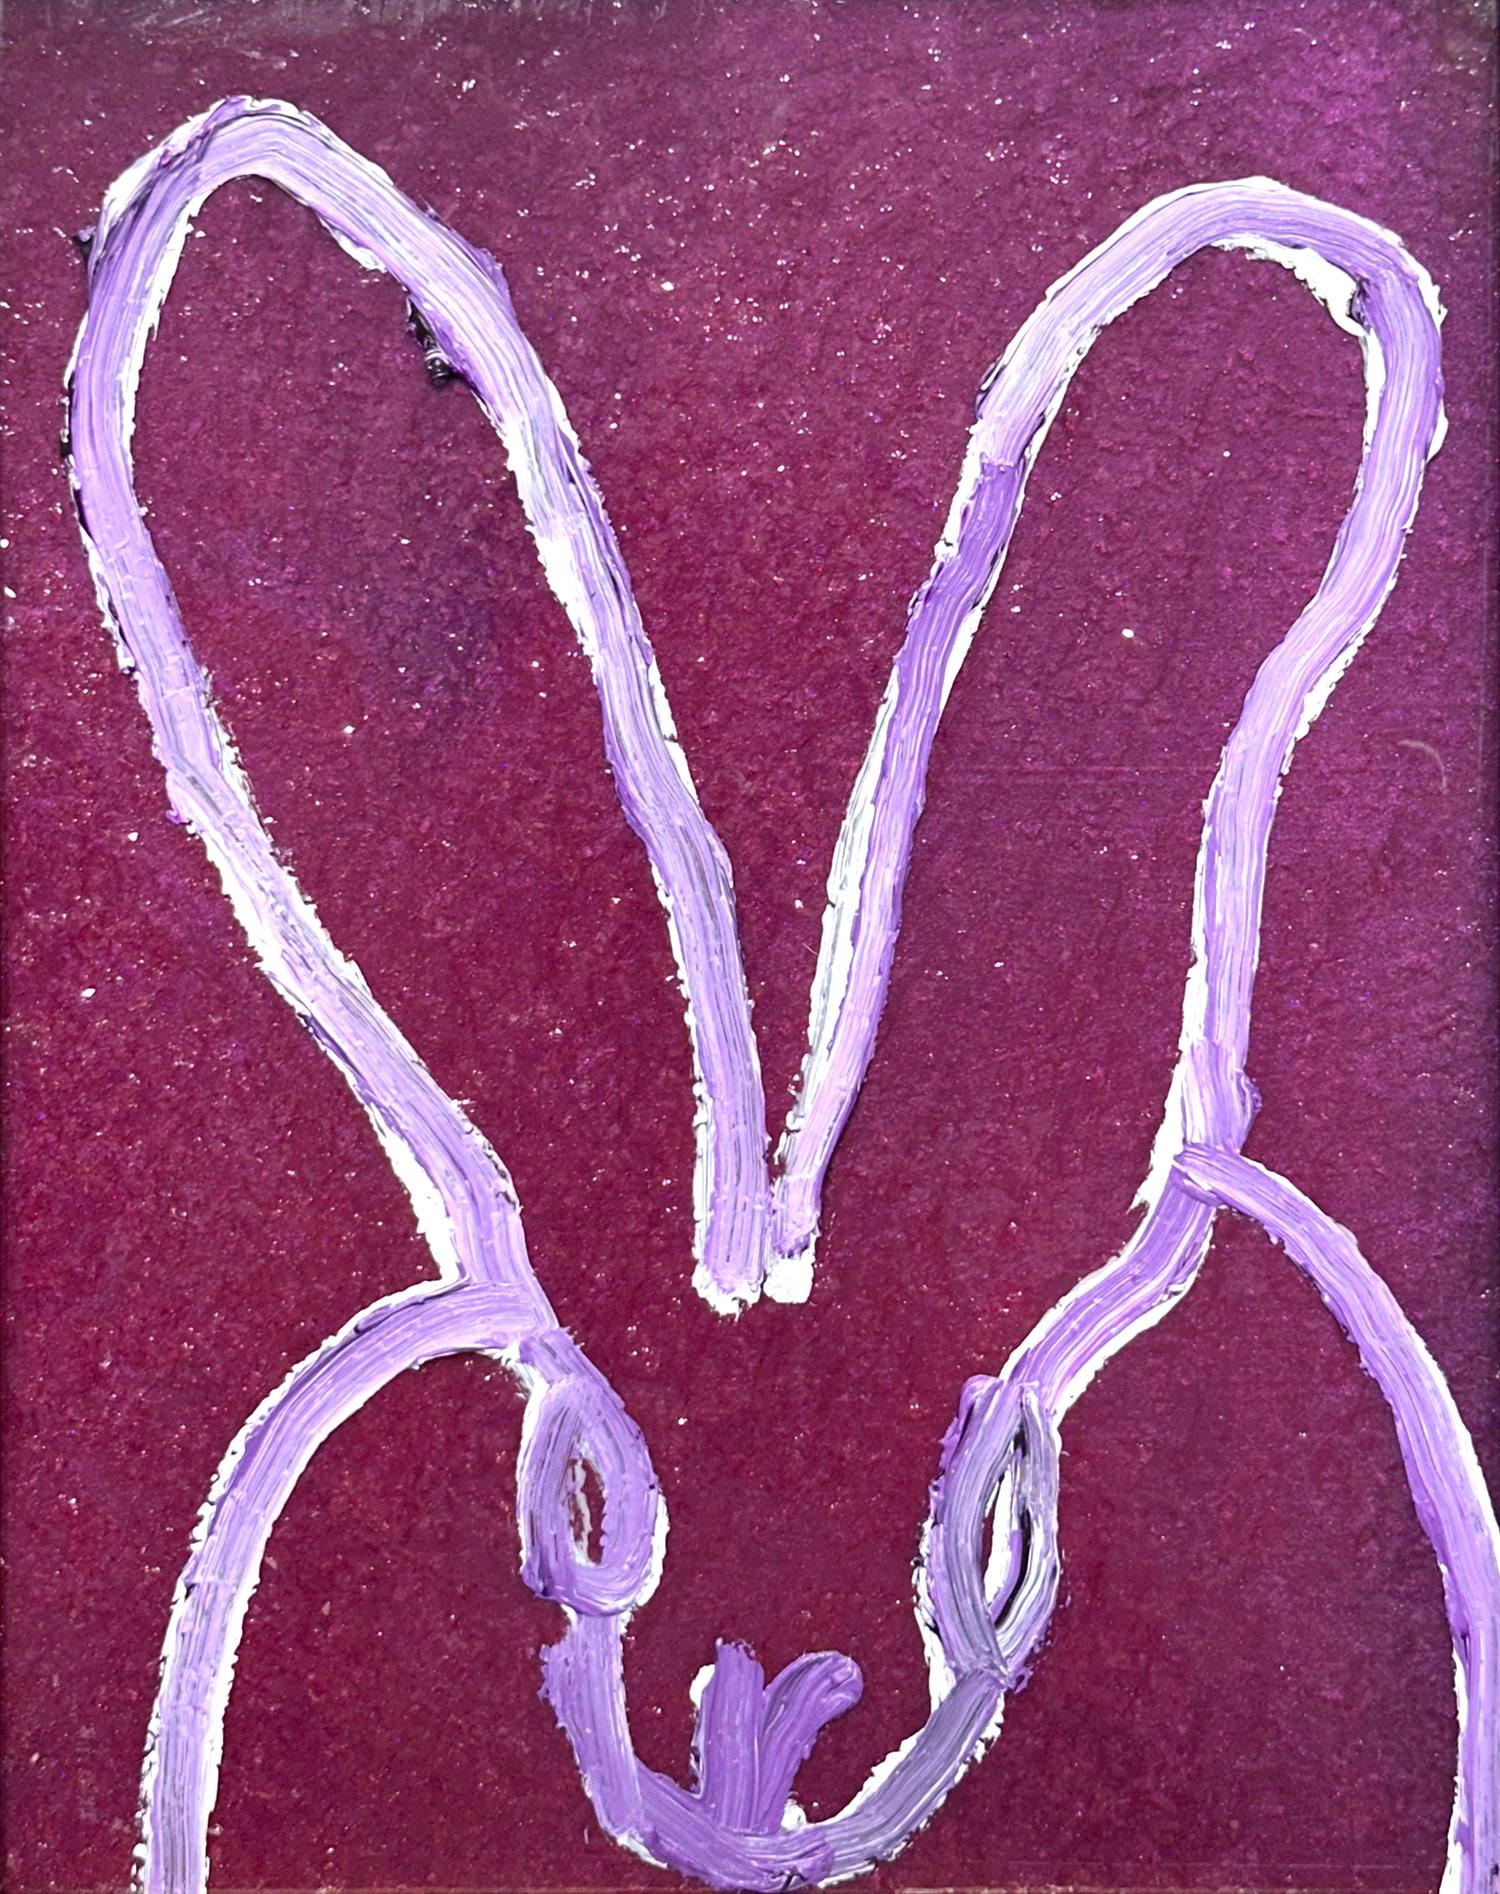 A wonderful composition of one of Slonem's most iconic subjects, Bunnies. This piece depicts a gestural figure of a black bunny on a Purple Magenta background with thick use of paint and diamond dust. It is housed in a wonderful antique frame.